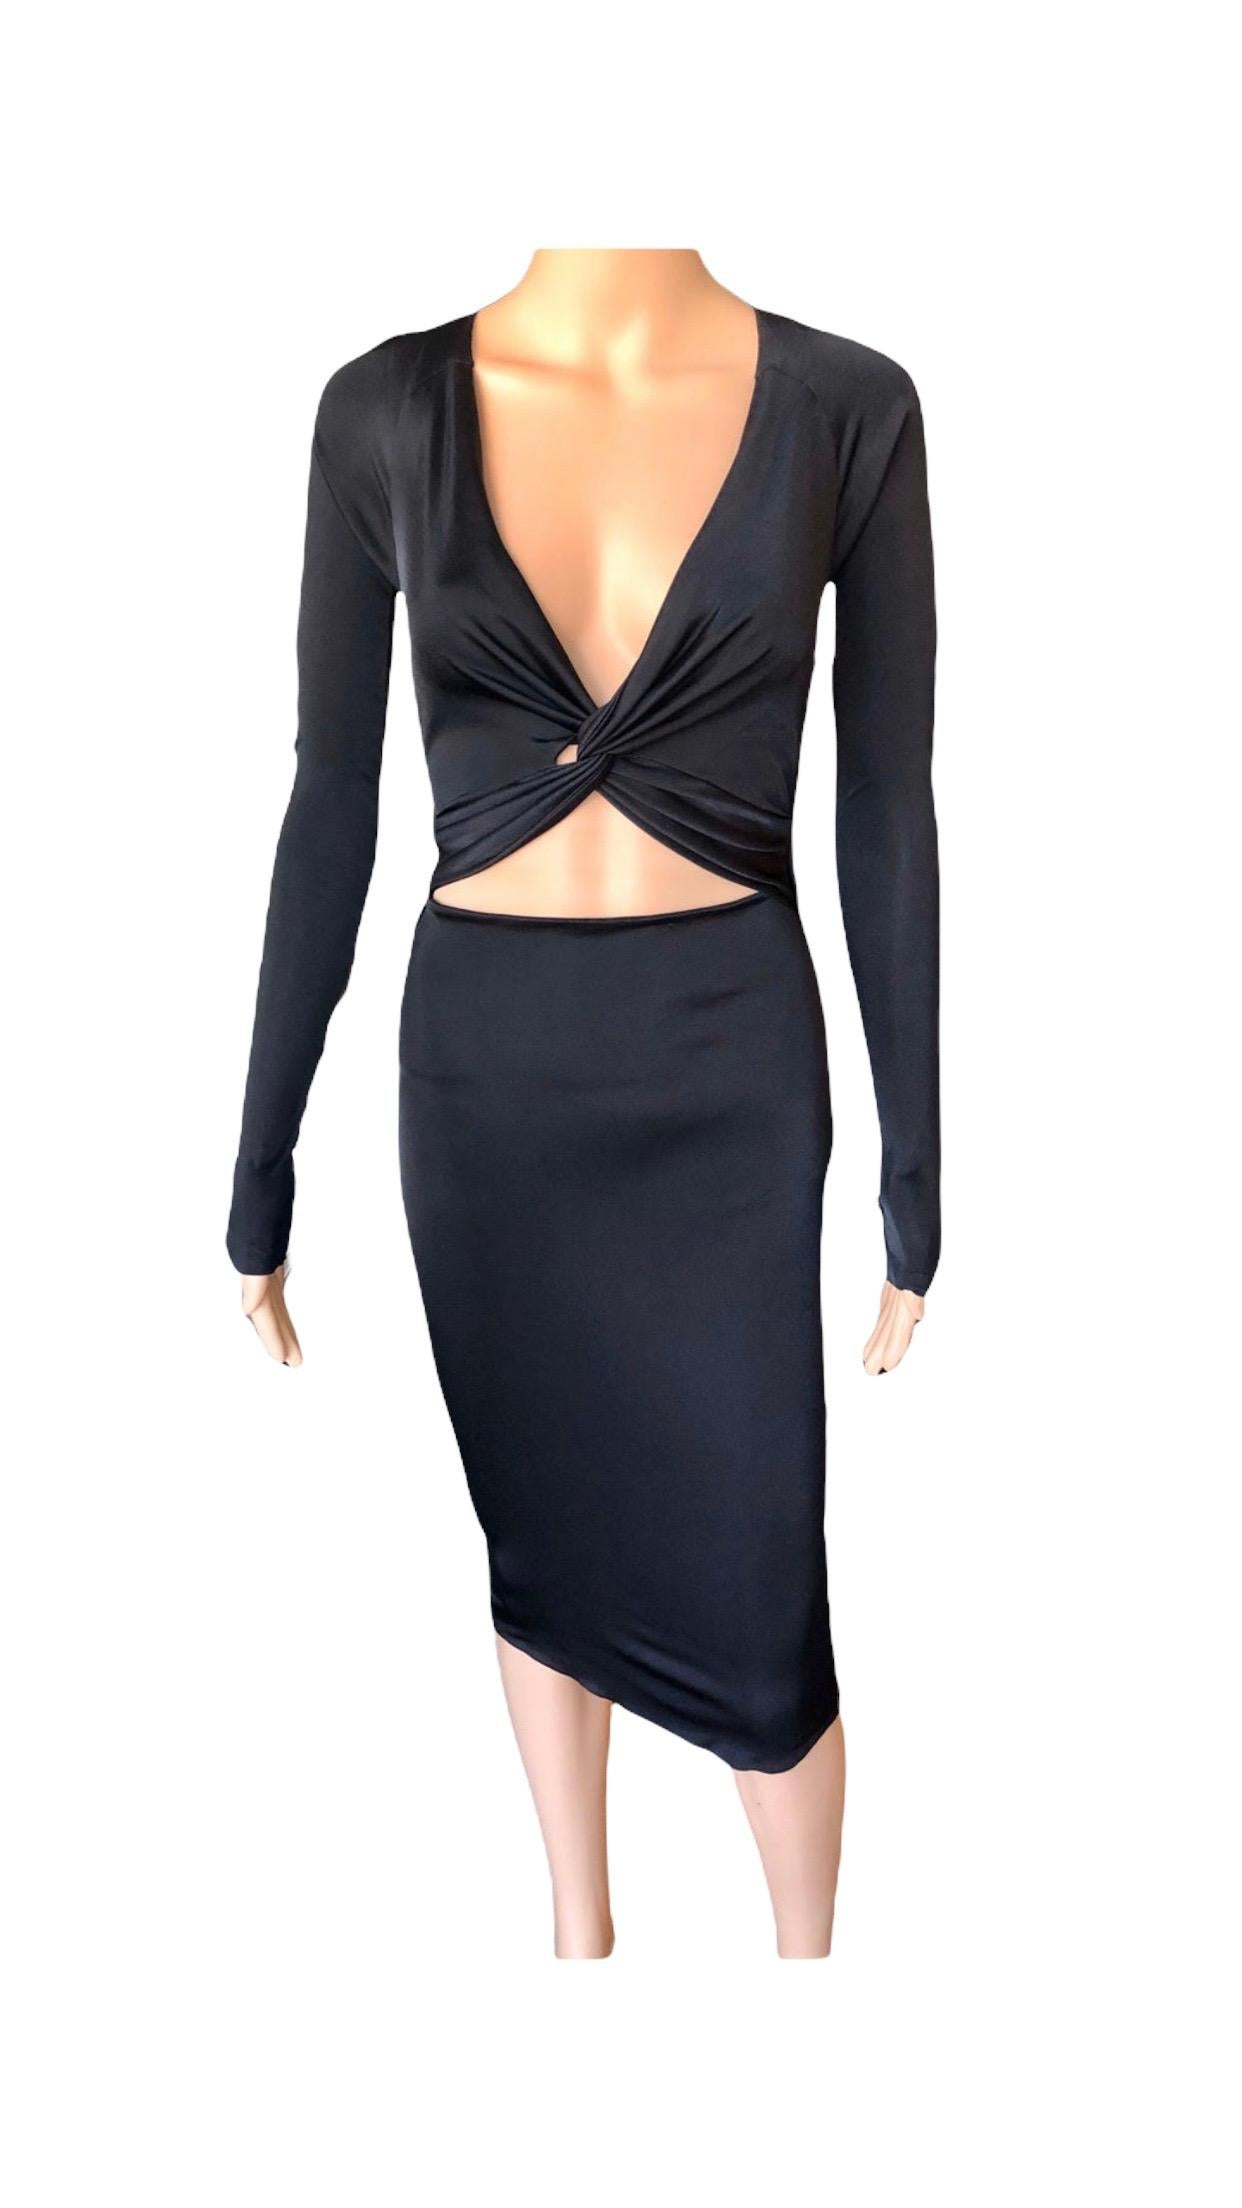 Gucci S/S 2005 Tom Ford Plunging Cutout Backless Bodycon Black Dress For Sale 6